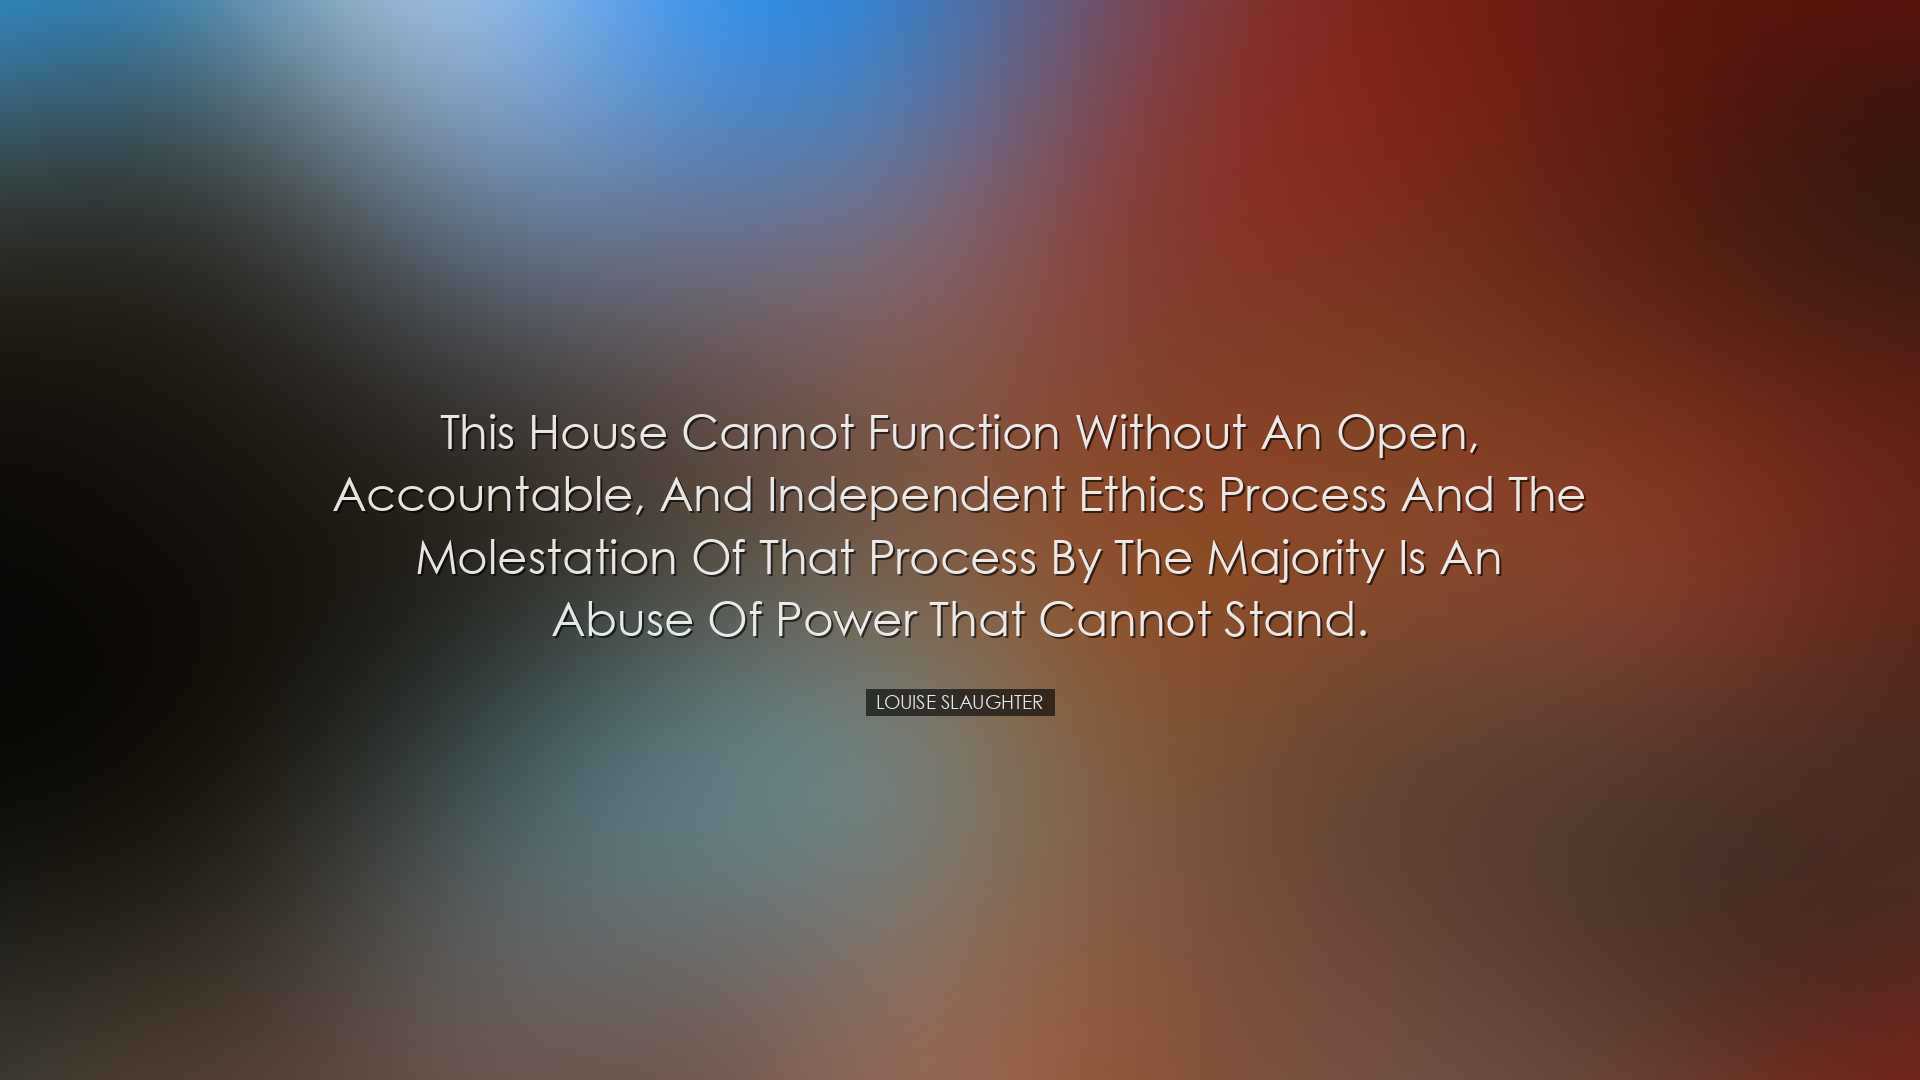 This House cannot function without an open, accountable, and indep